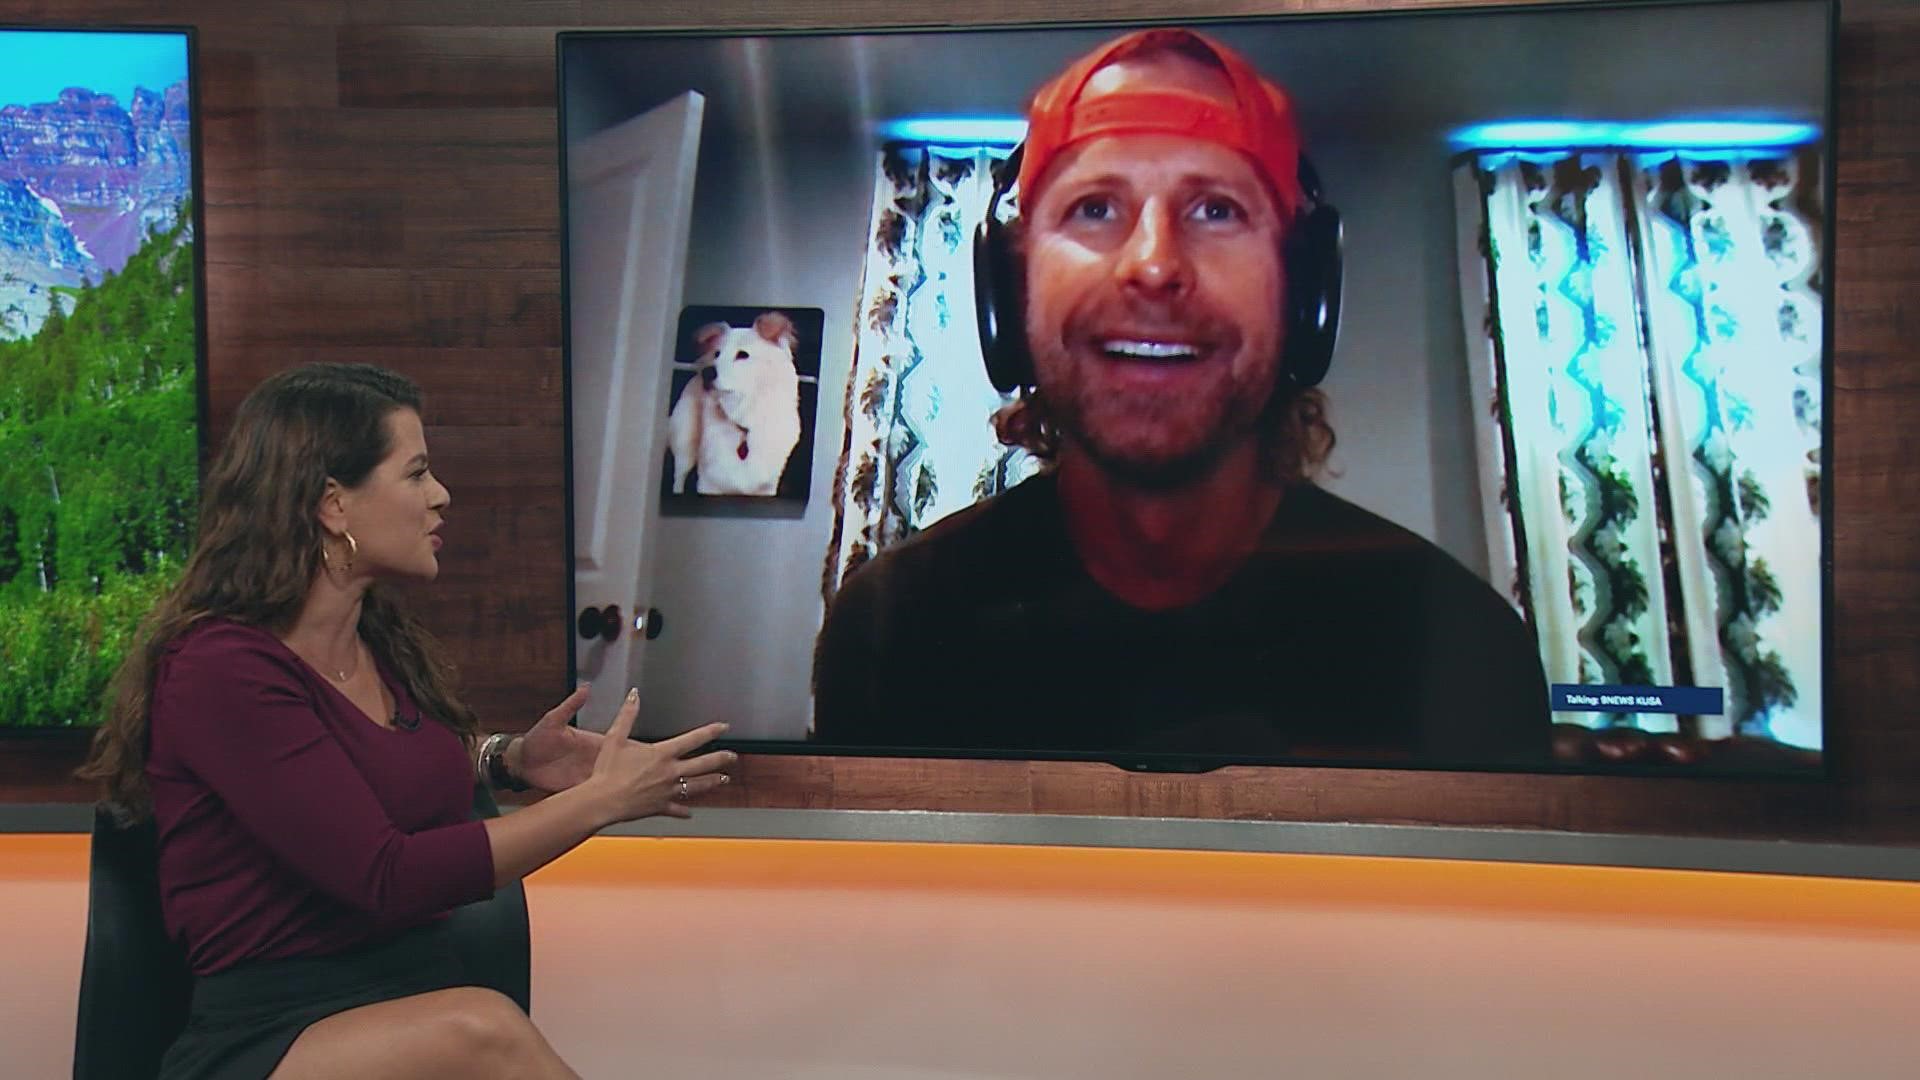 Country music star, Dierks Bentley, talks about his music festival in Villa Grove, CO. The festival is Sept 2-4.